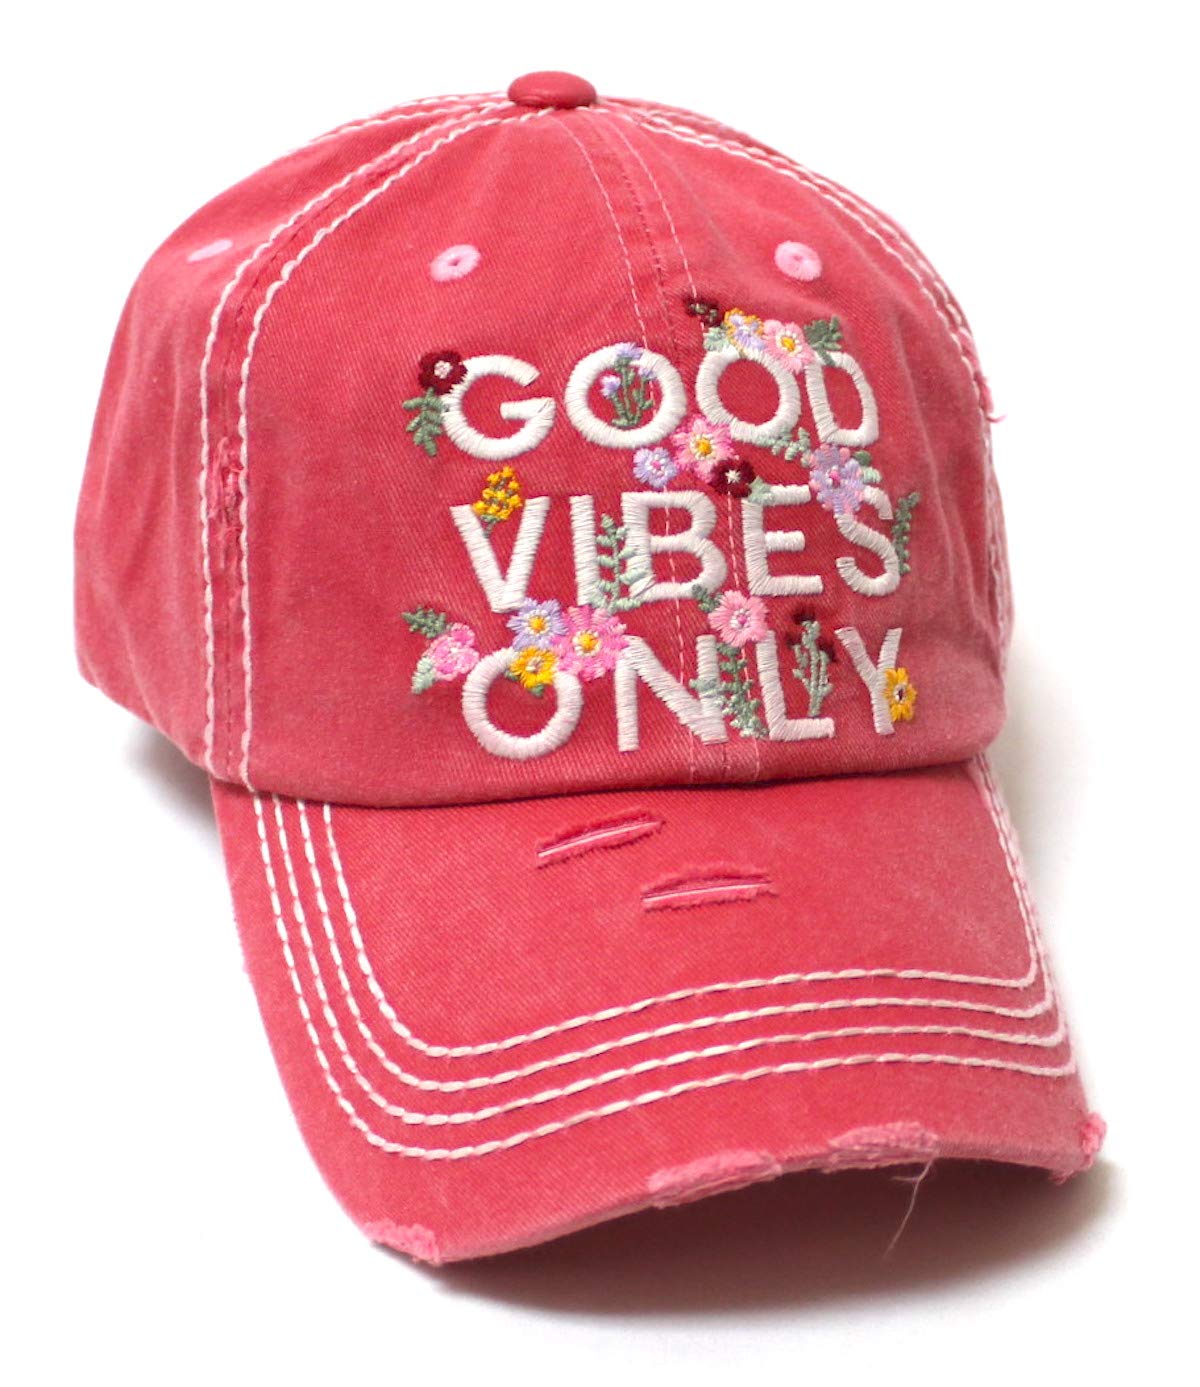 Women's Summer Ballcap Good Vibes Only Floral Monogram Embroidery Beach Hat, Rose Pink - Caps 'N Vintage 